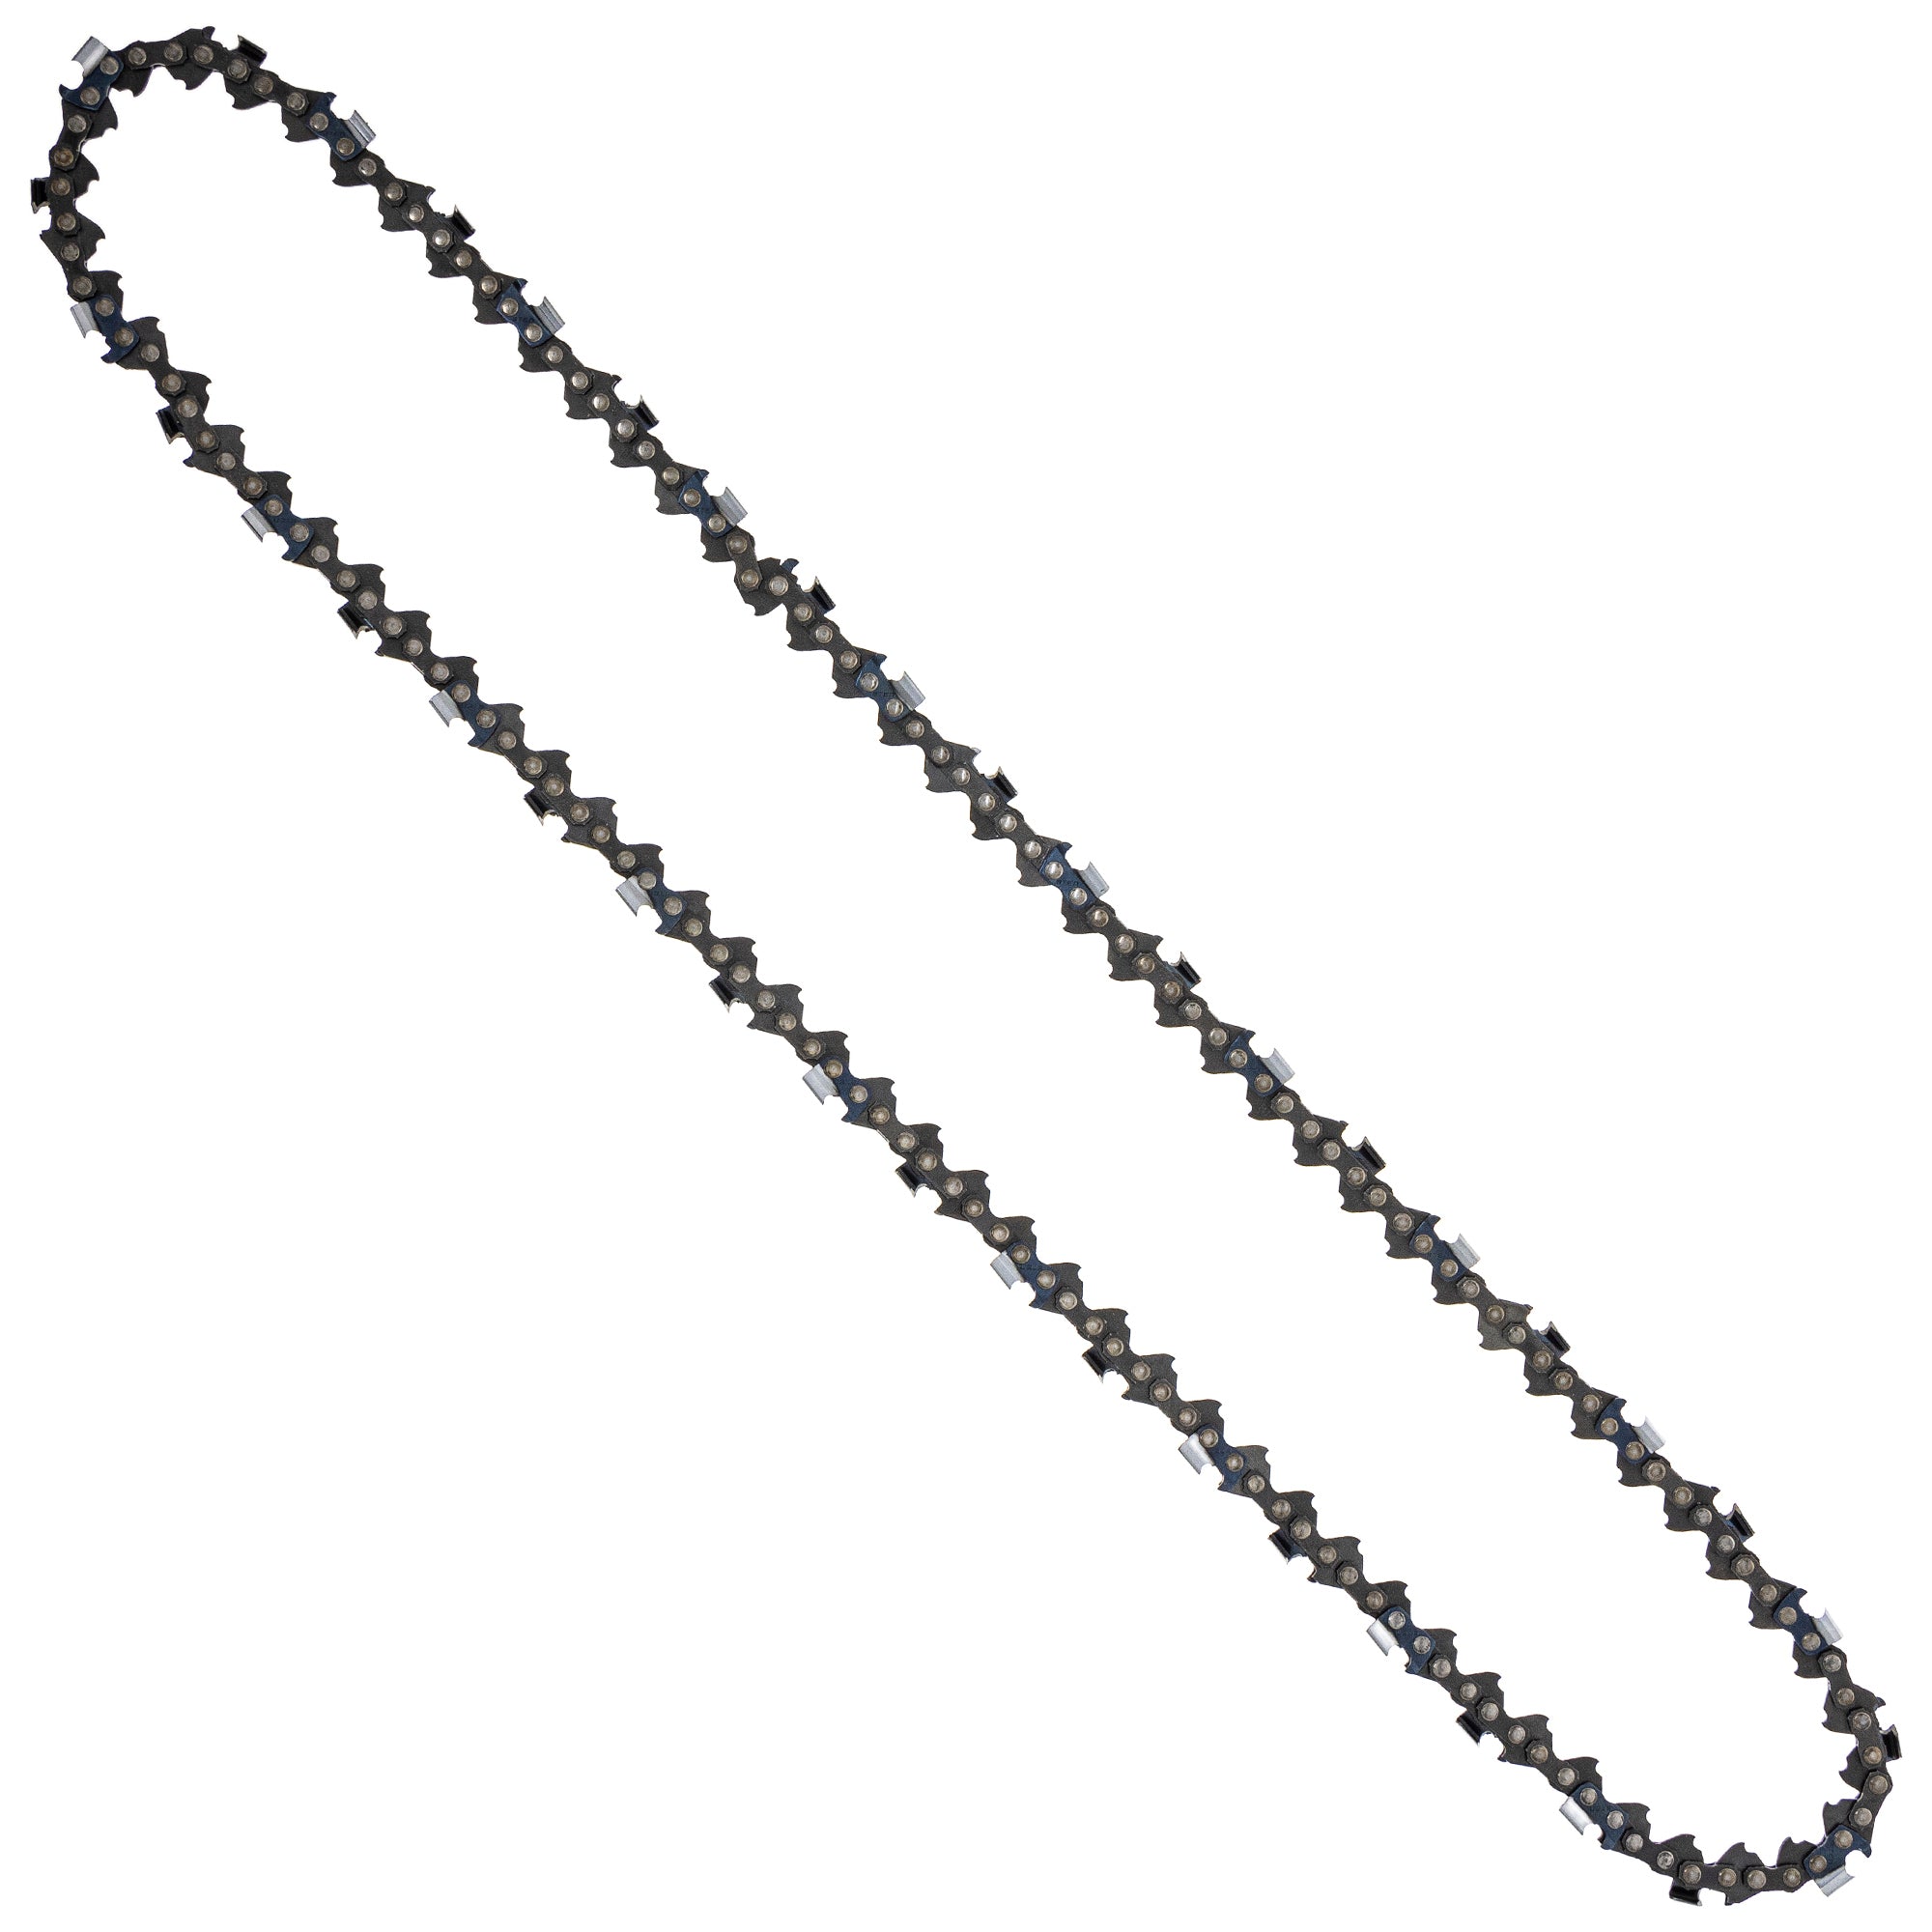 8TEN 810-CCC2268H Chain 3-Pack for zOTHER Oregon EA5600F 555 550 545